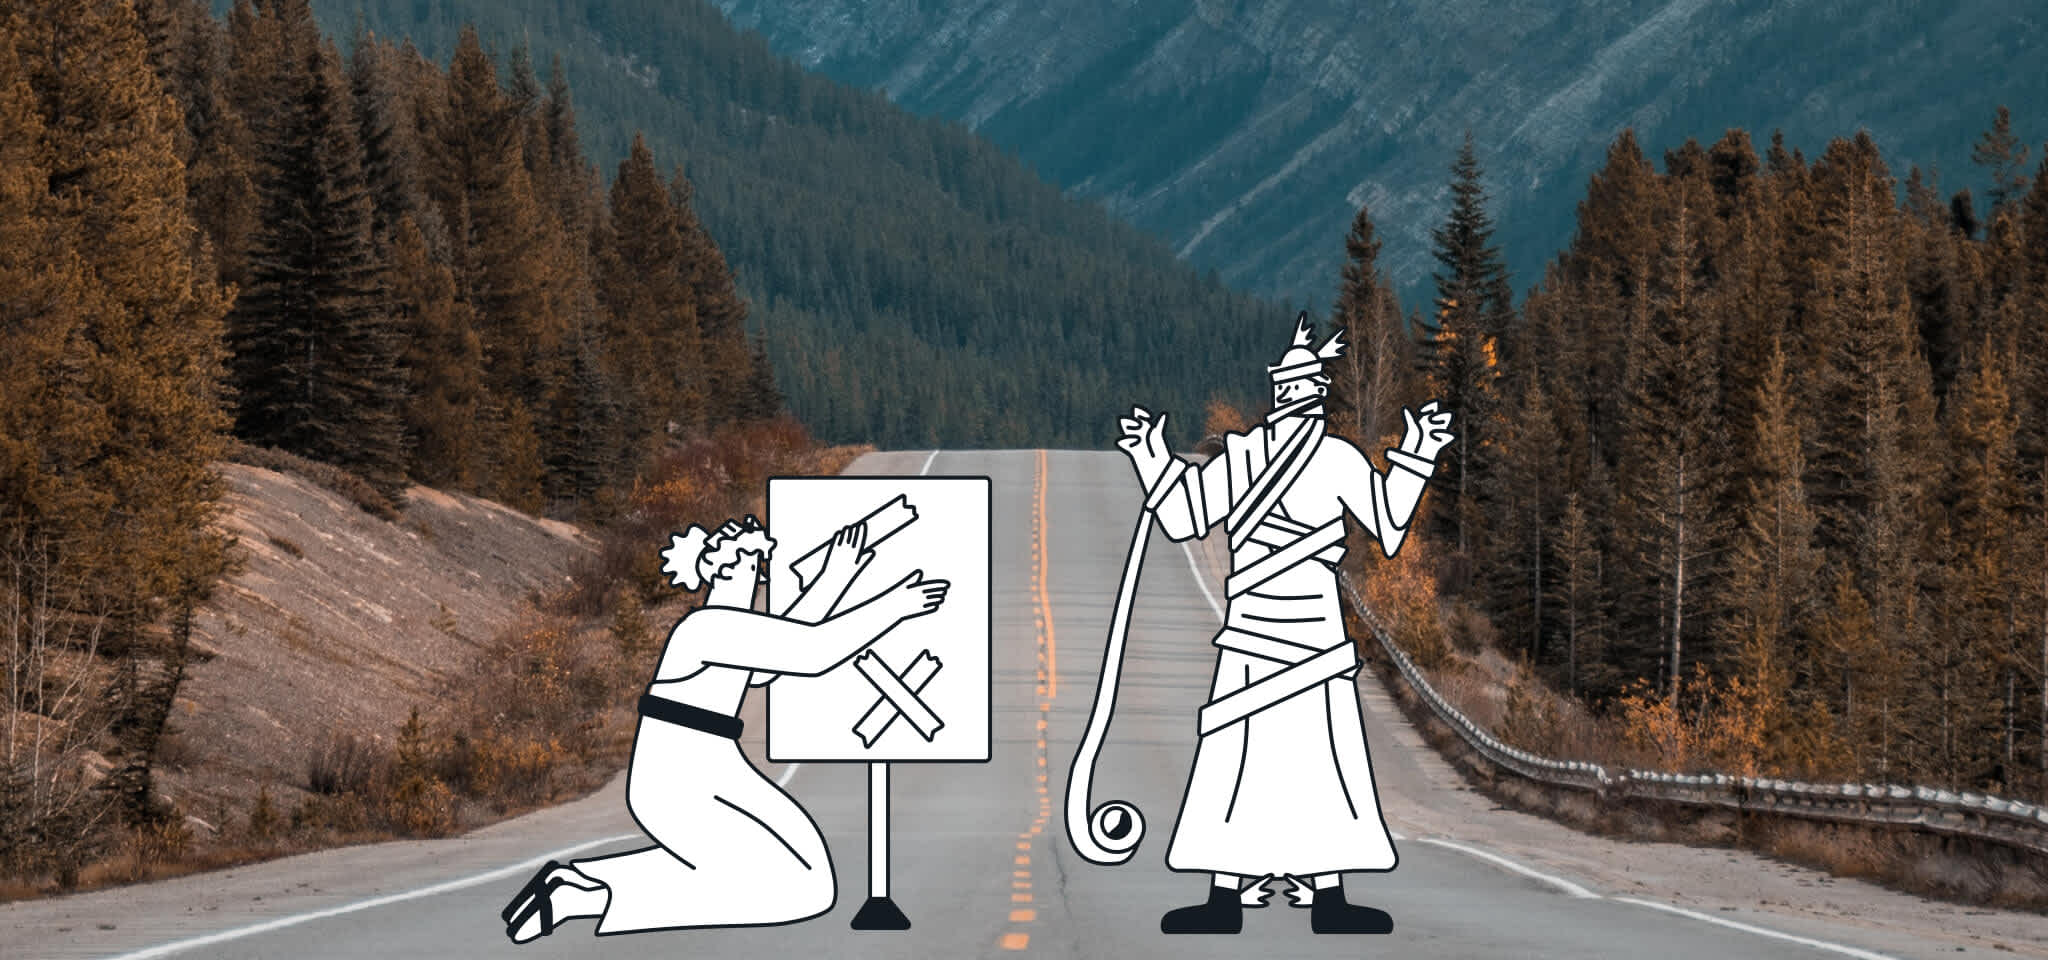 Hermes is tangled up with tape while helping a Goddess to fix a sign on a road in the forest